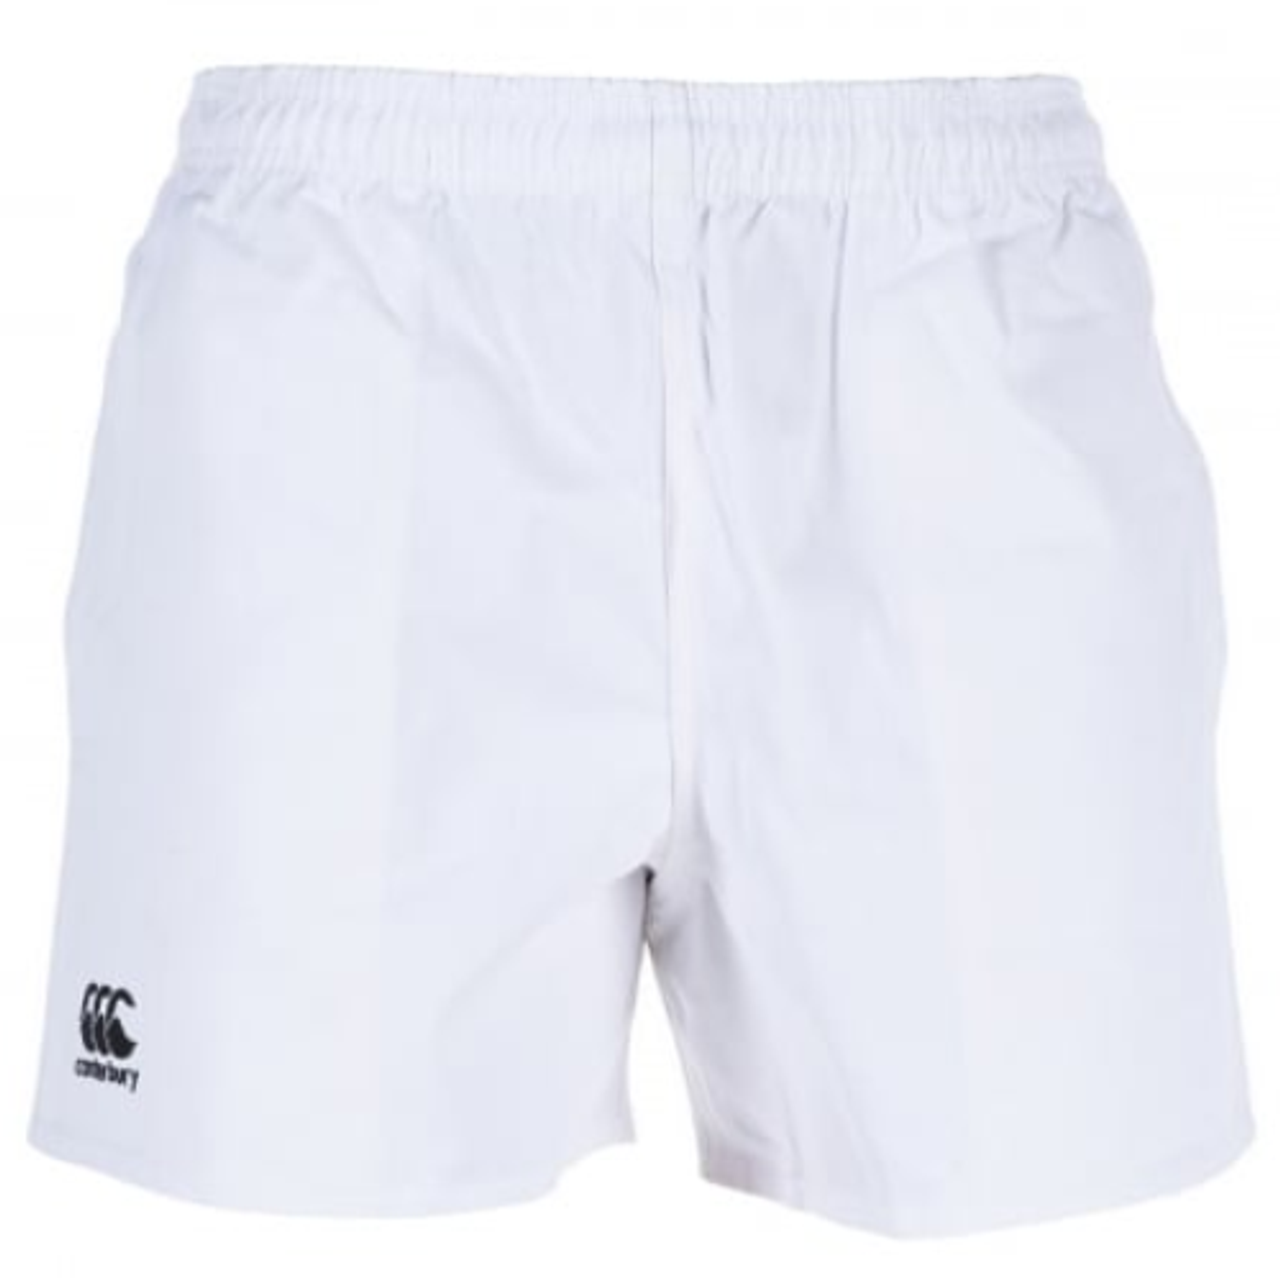 Canterbury Boys Professional Cotton Rugby Shorts